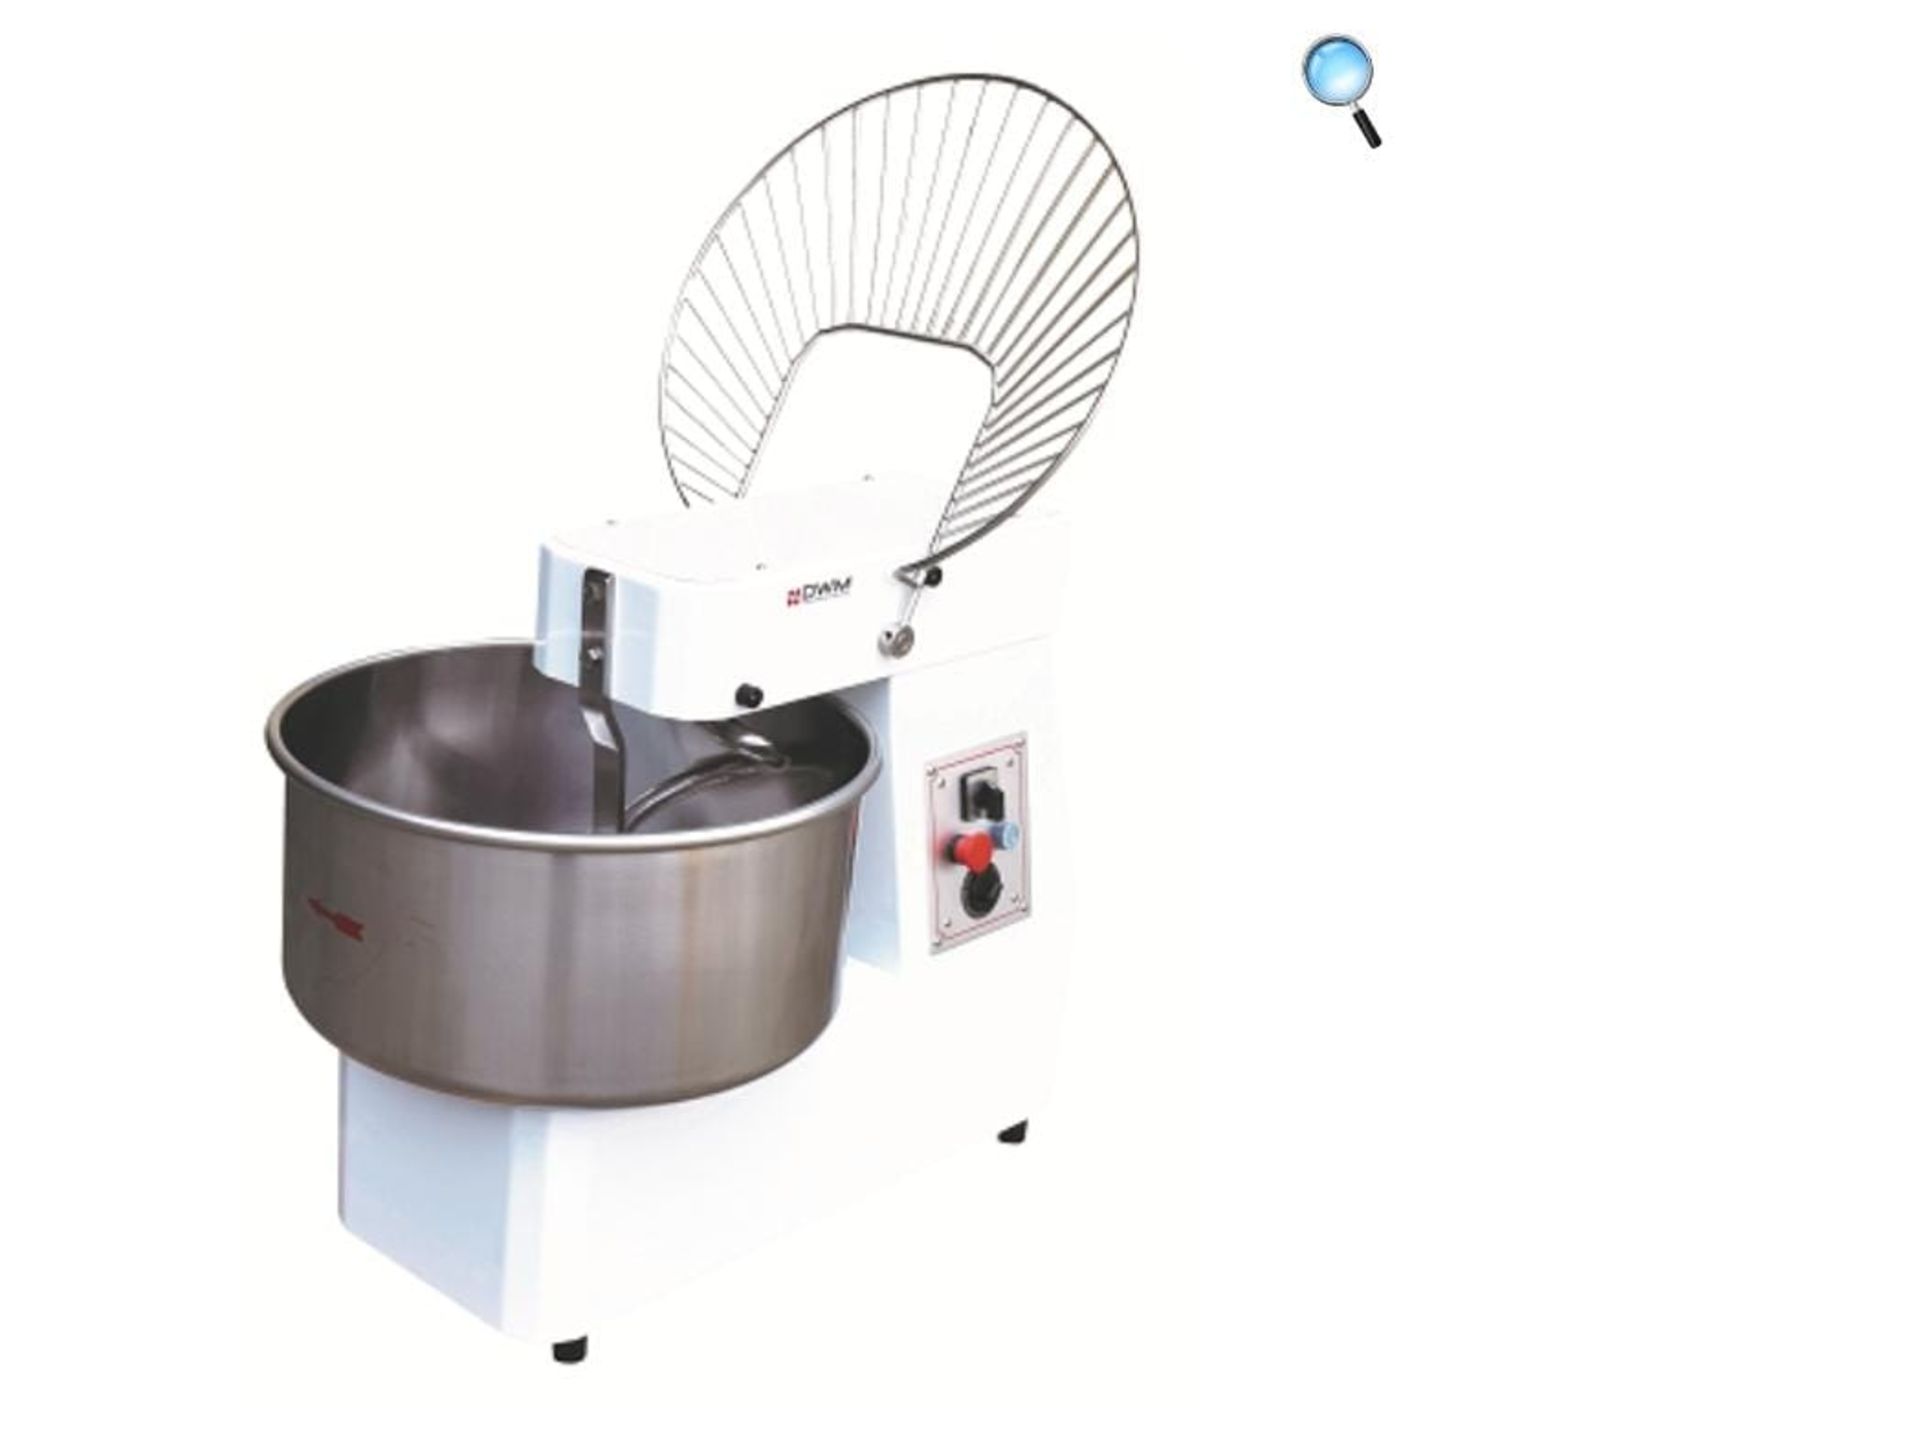 BRAND NEW 30L DOUGH MIXER SPRIAL - ITALIAN MADE - STILL IN BOX - 13 AMP UK PLUG - Image 6 of 6